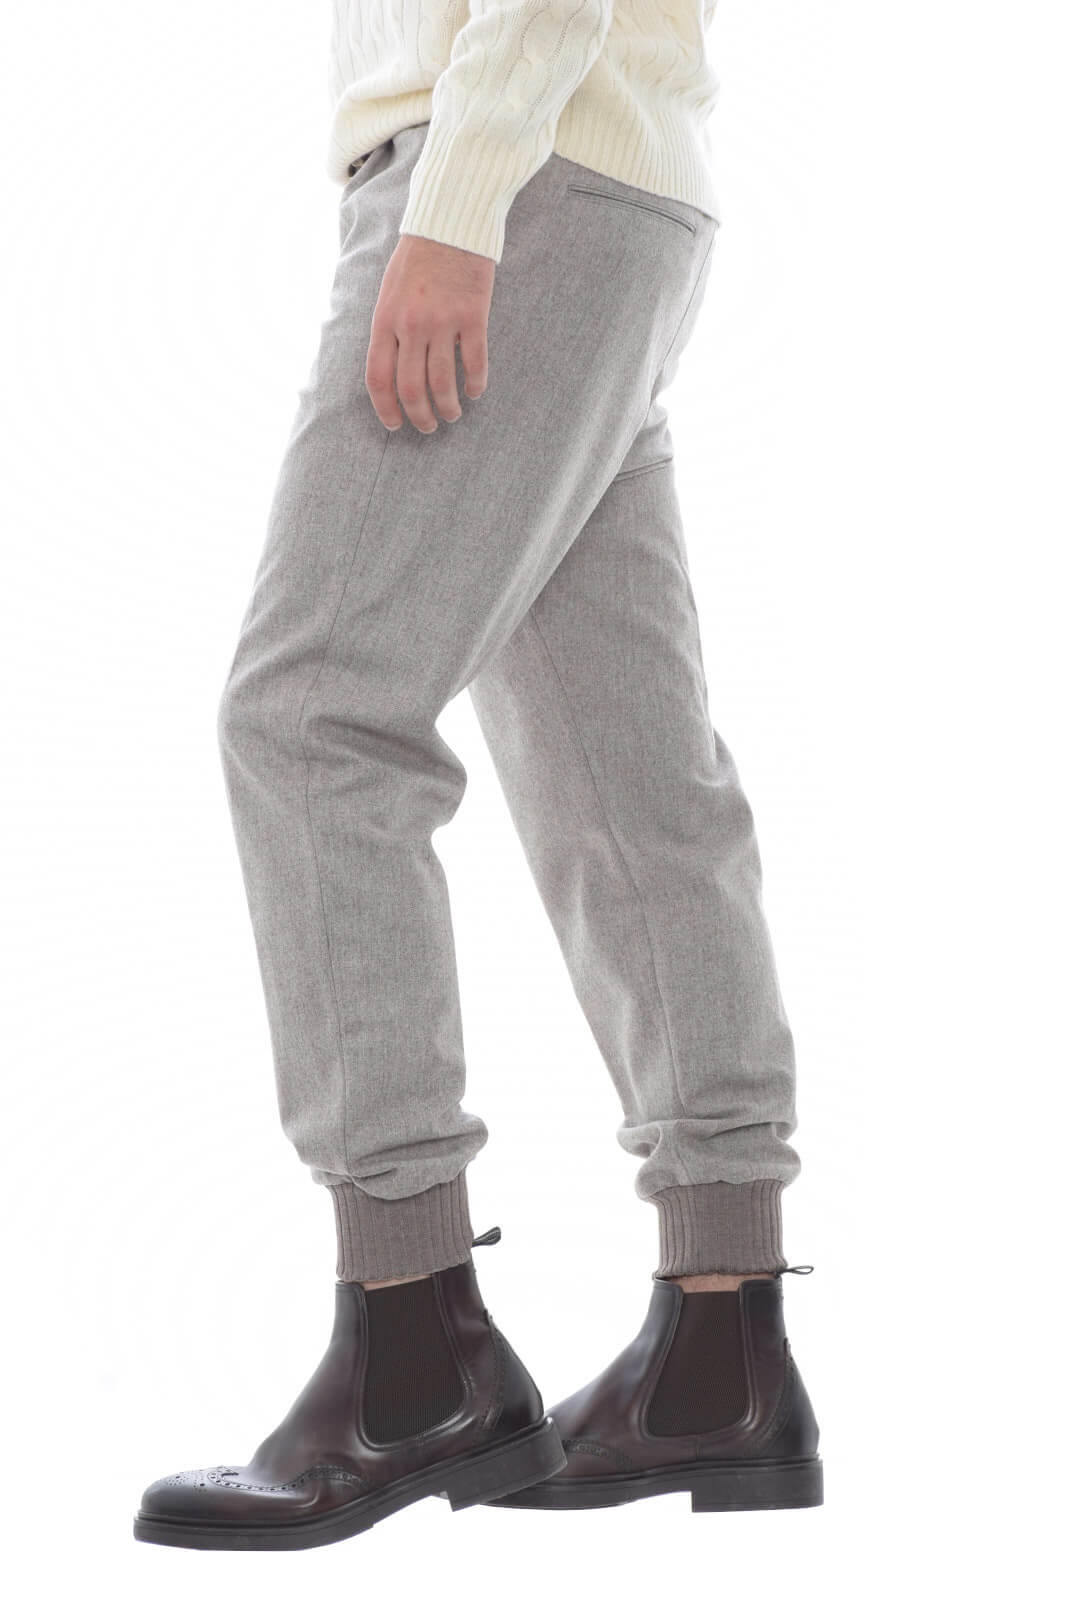 Tagliatore Men's trousers with ribbed cuffs